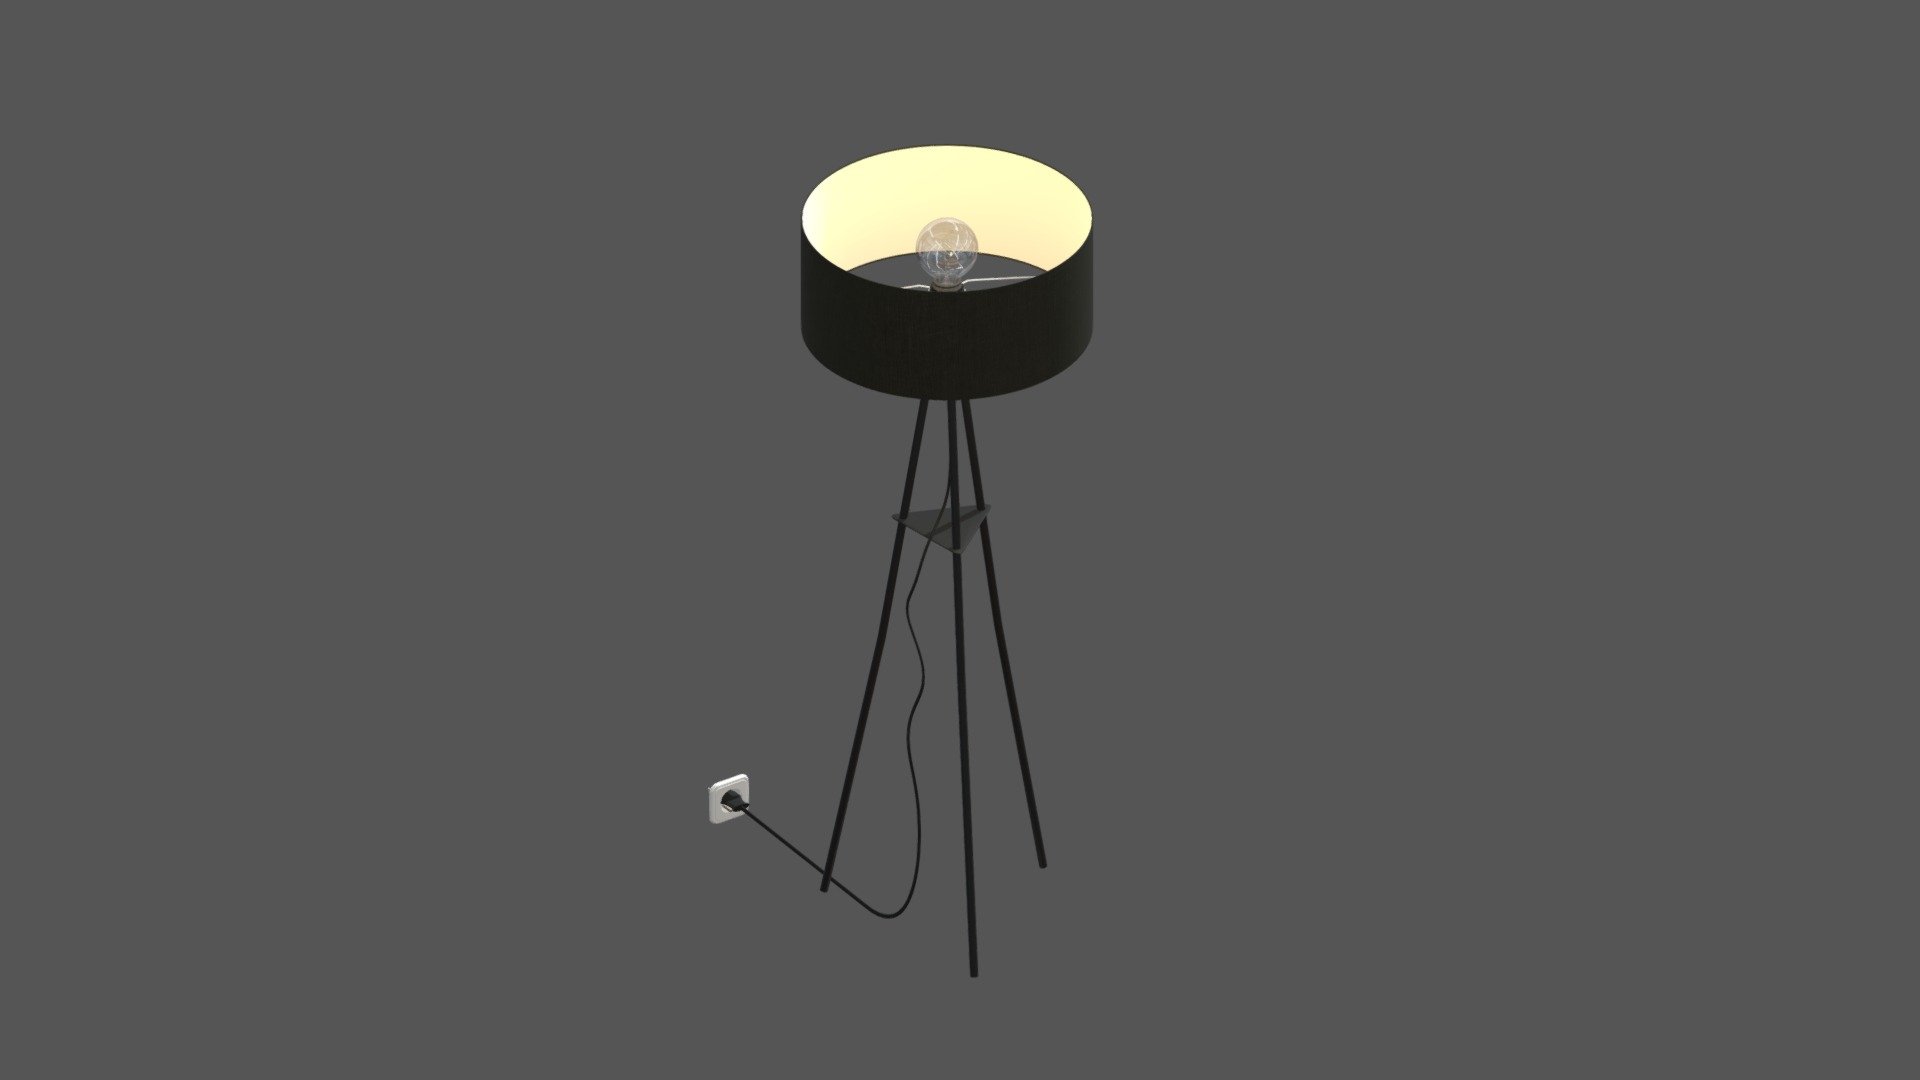 I modeled a modern floor lamp, I have standing in my living room. I added the electrical plug so it can be an easy set up for your project 3d model